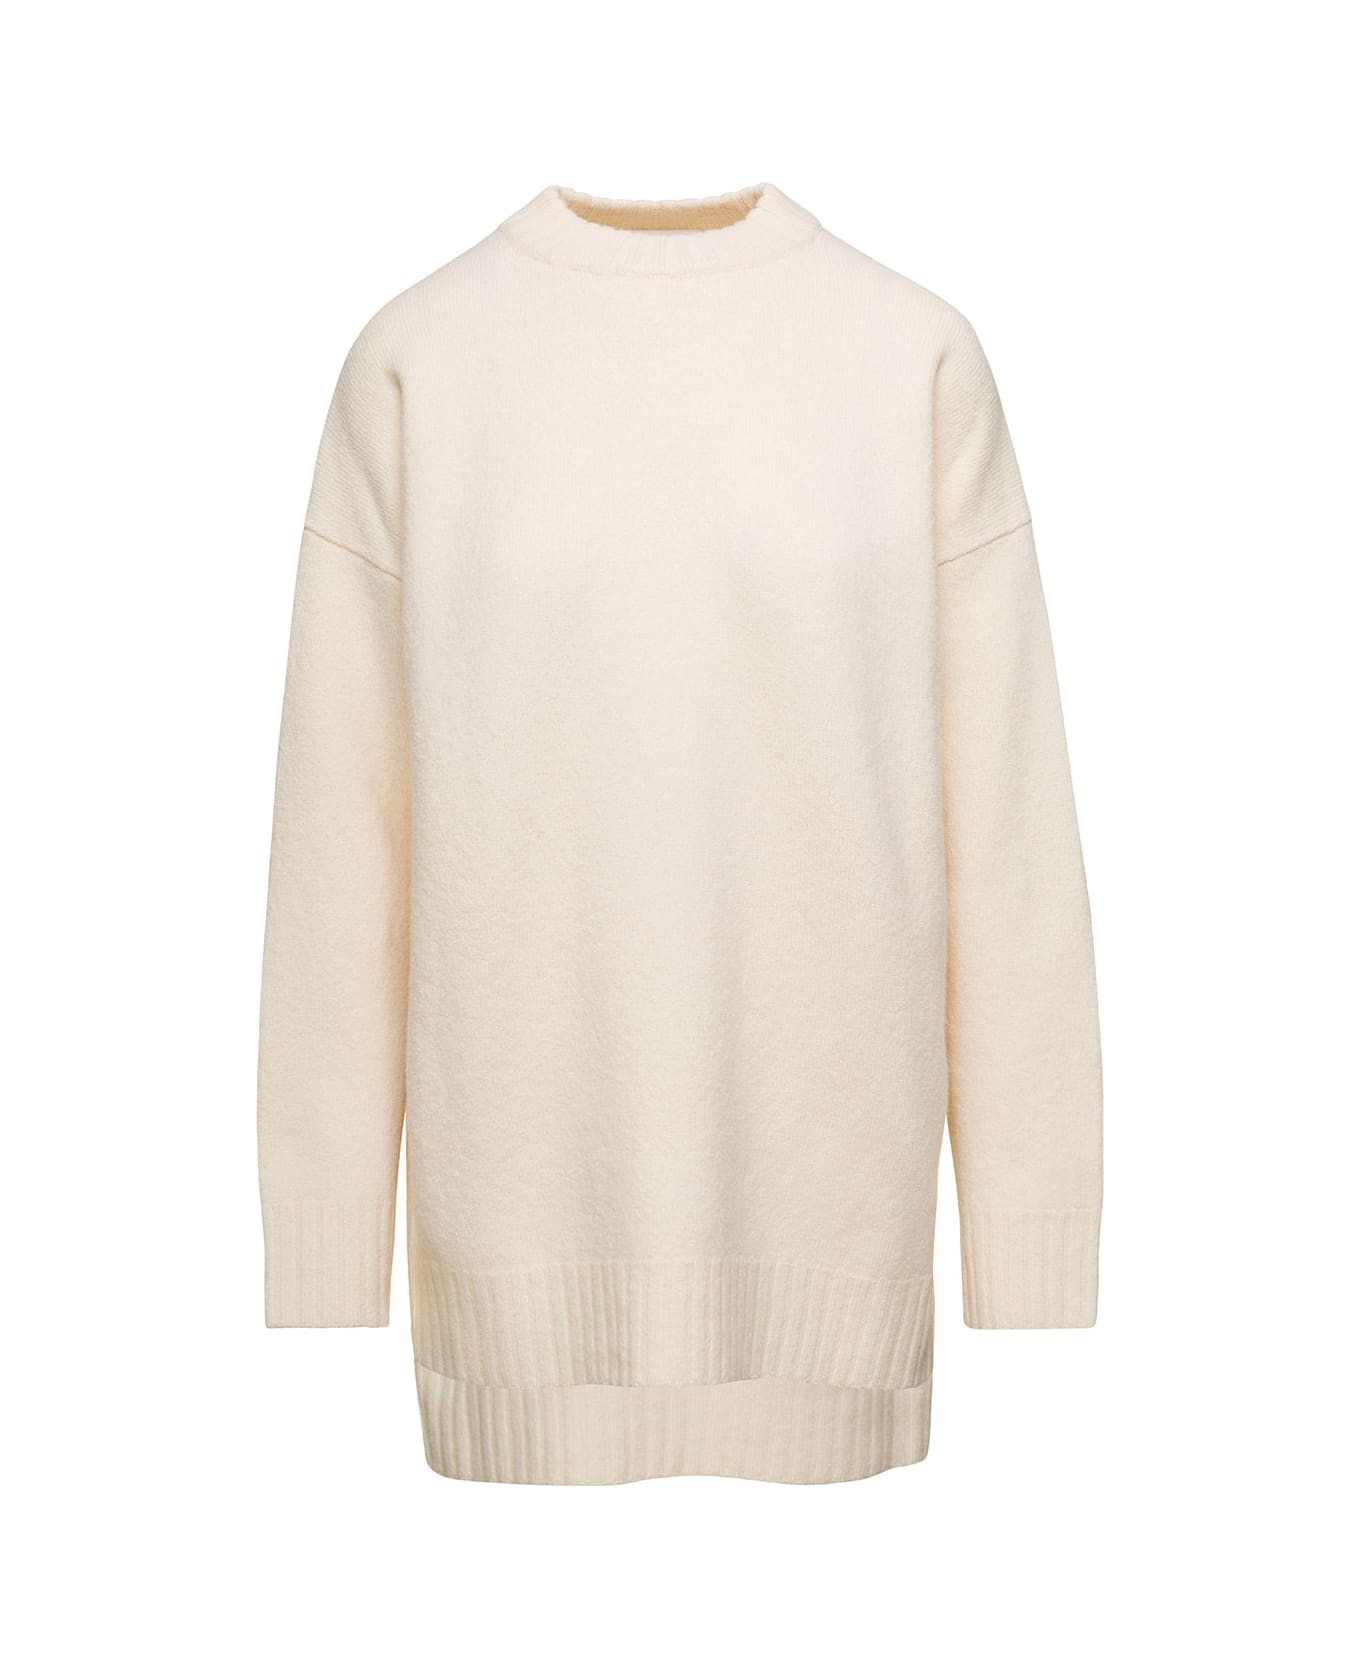 Jil Sander Oversized White Crewneck Sweater With Shorter Hem At The Front In Wool Woman - White